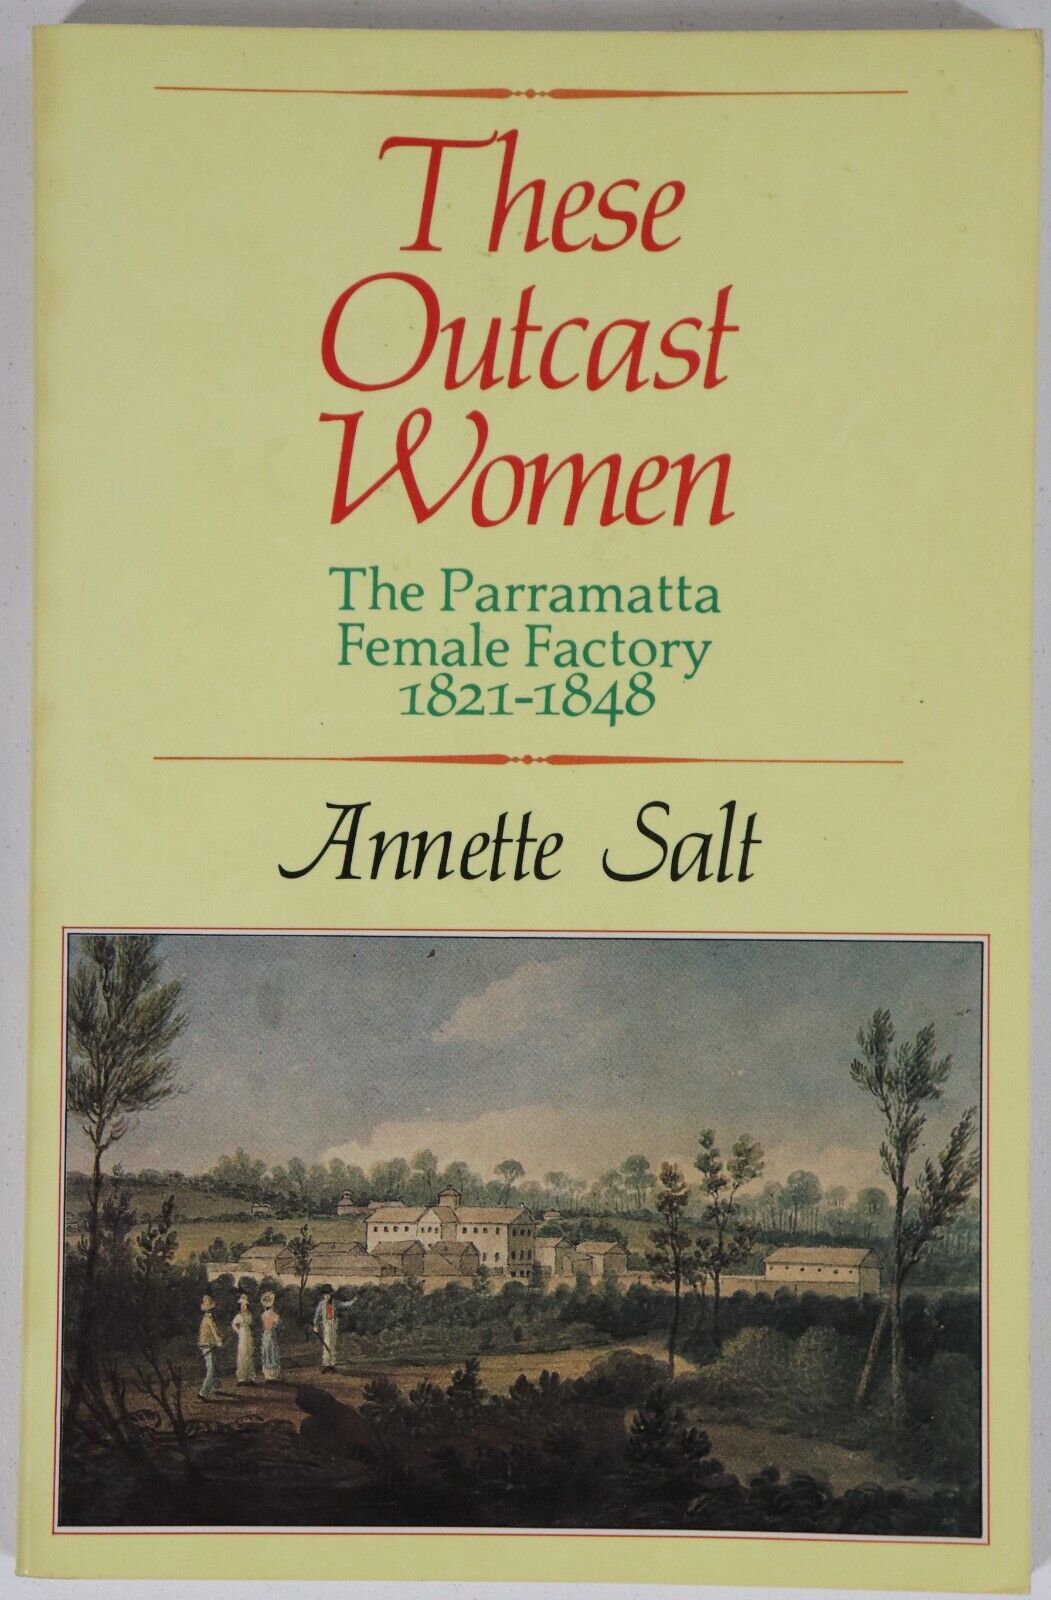 These Outcast Women by Annette Salt - 1984 - Australian Colonial History Book